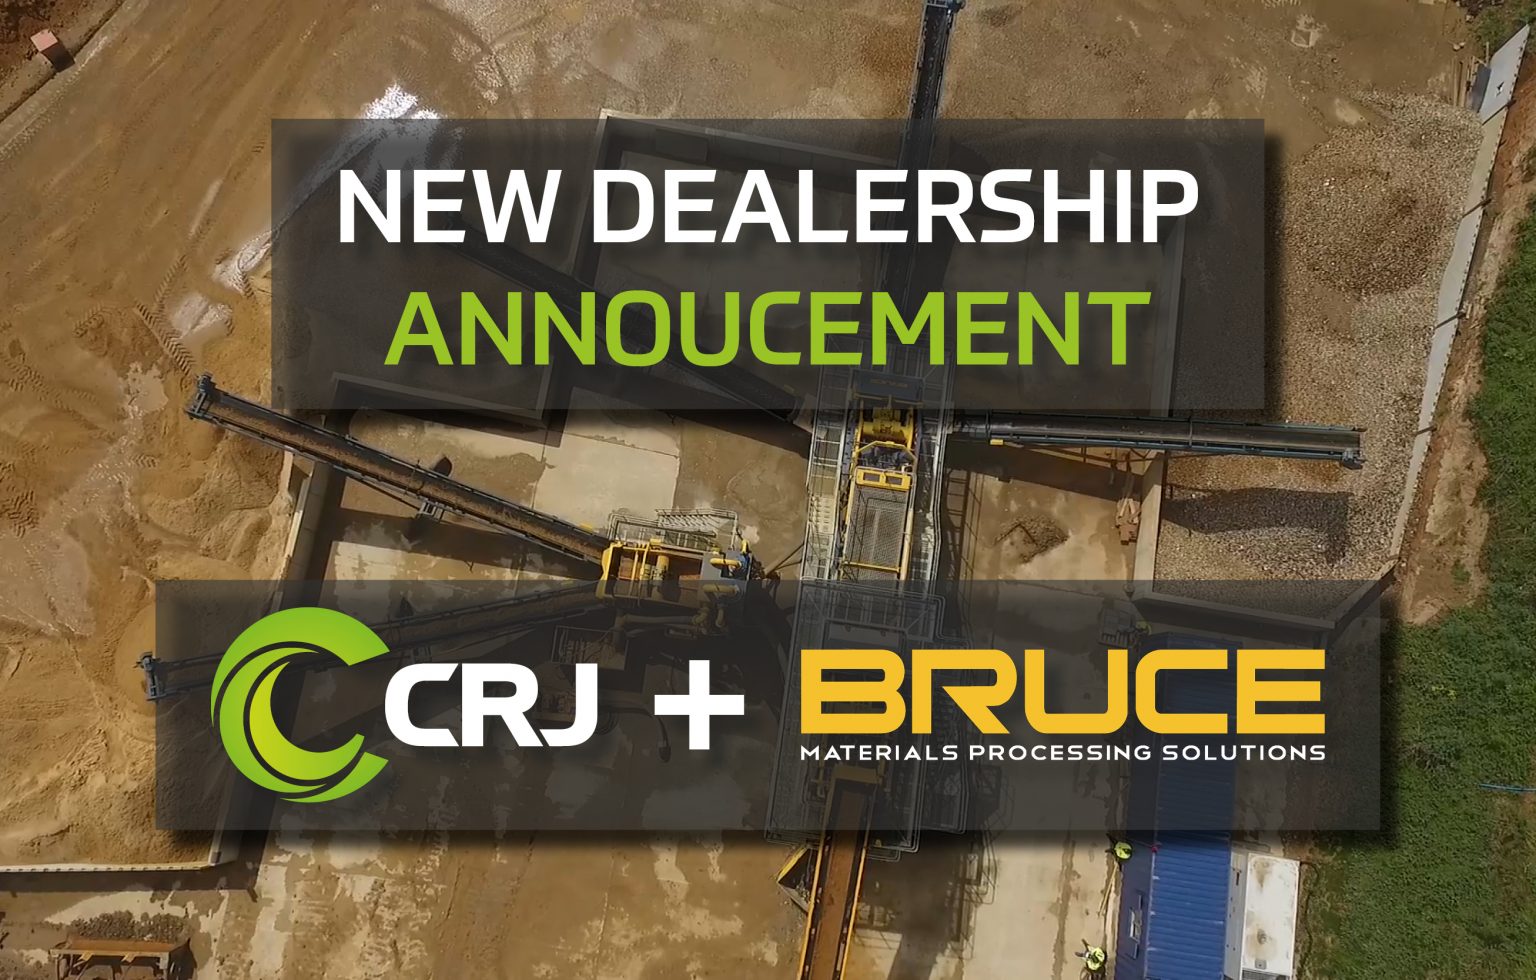 CRJ Services becomes exclusive distributor for Bruce Engineering in the Midlands and north of England